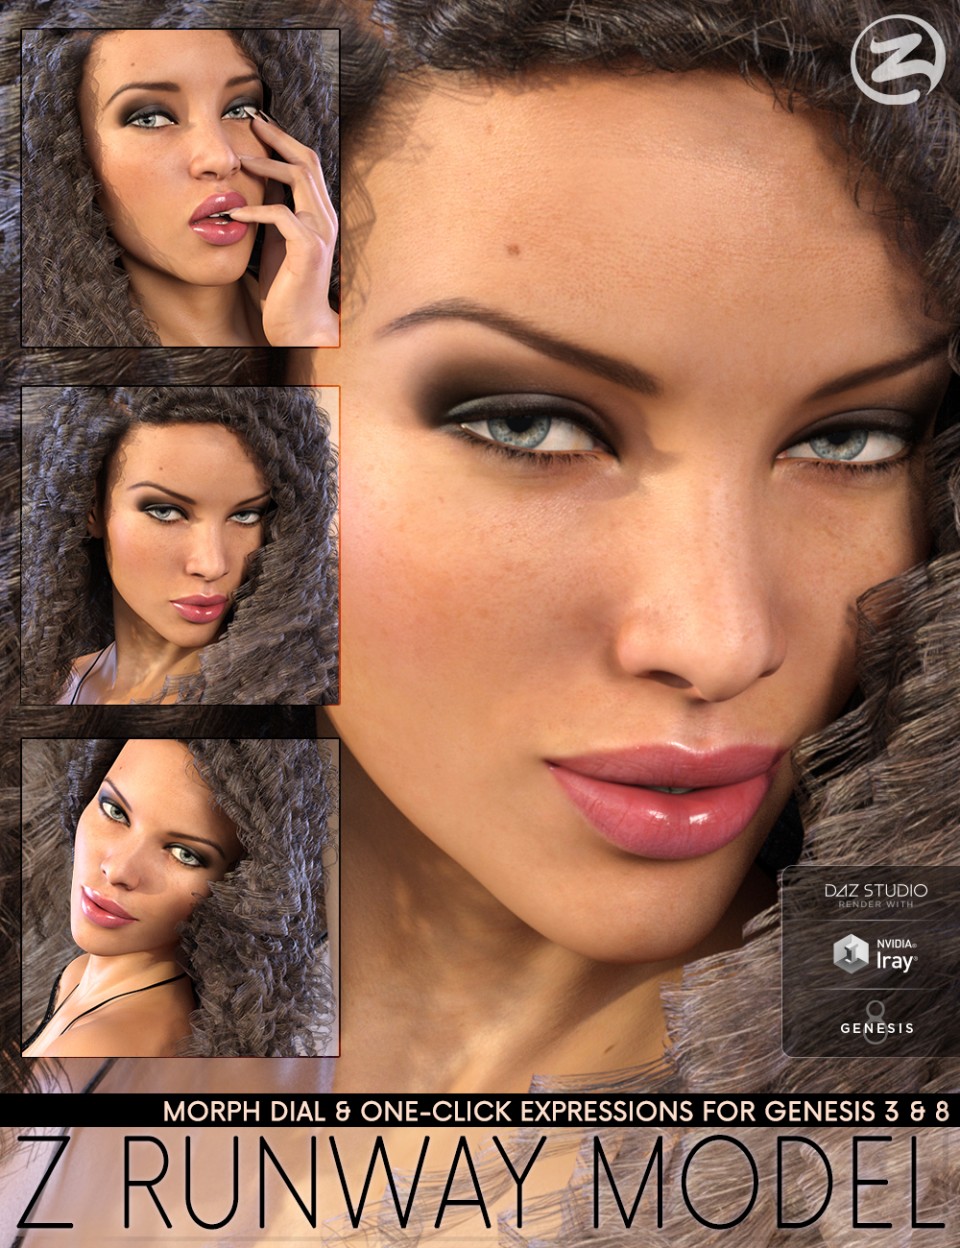 Z Runway Model – Dialable and One-Click Expressions for Genesis 3 & 8_DAZ3D下载站